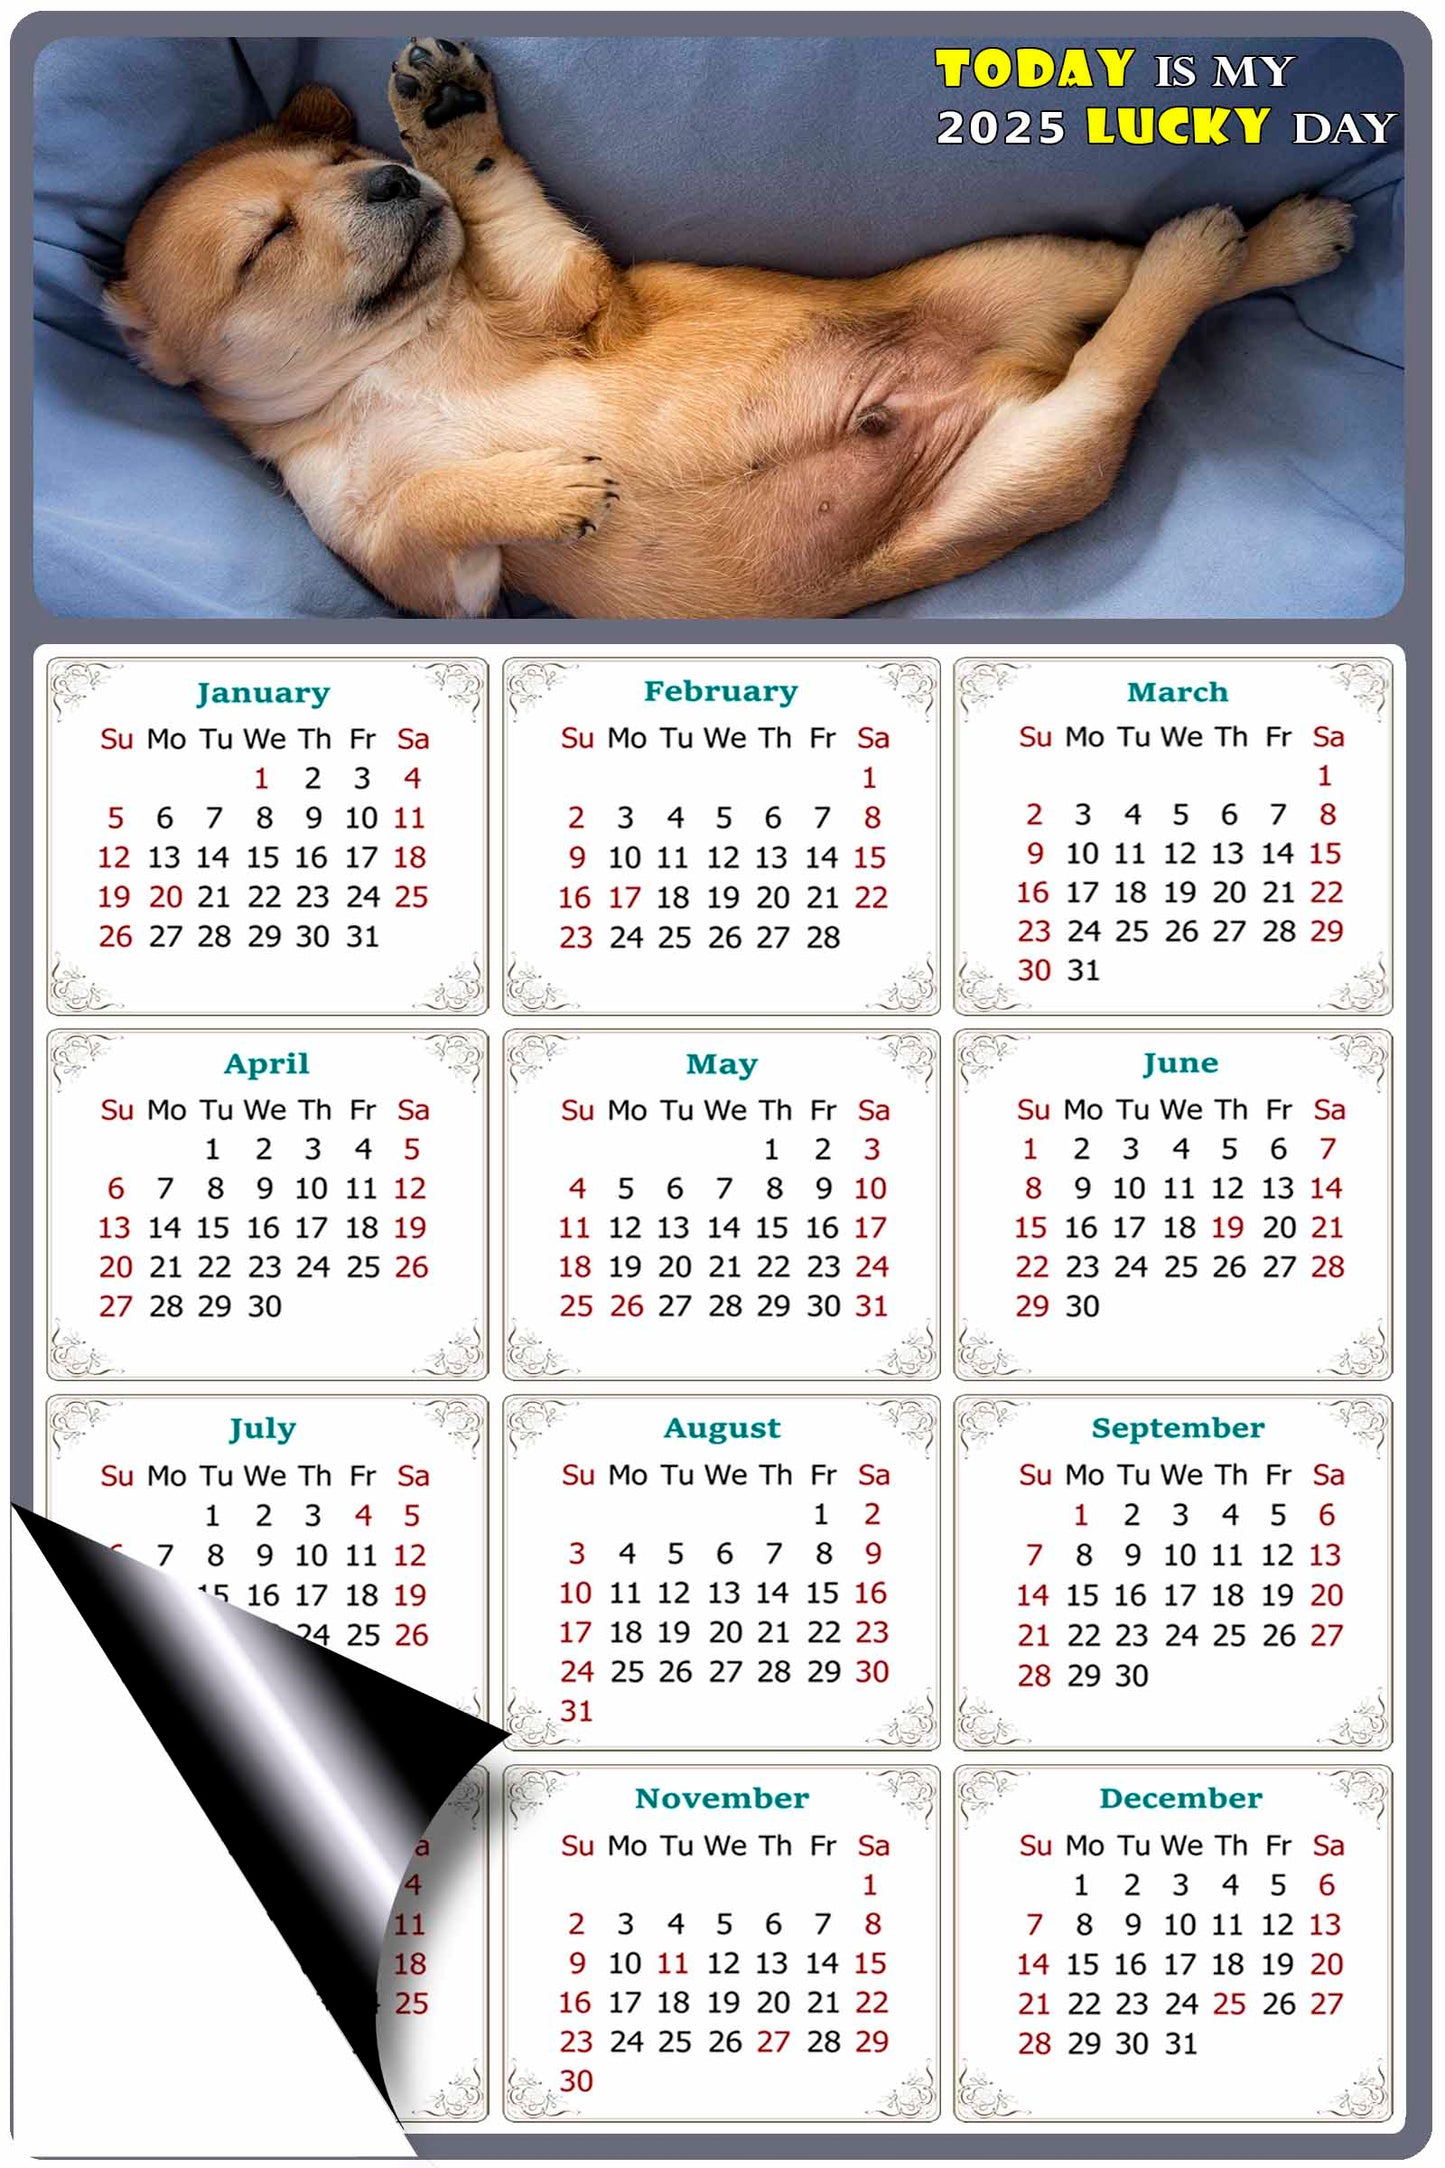 2025 Magnetic Calendar - Today is My Lucky Day (Fade, Tear, and Water Resistant)- Dogs Themed 013